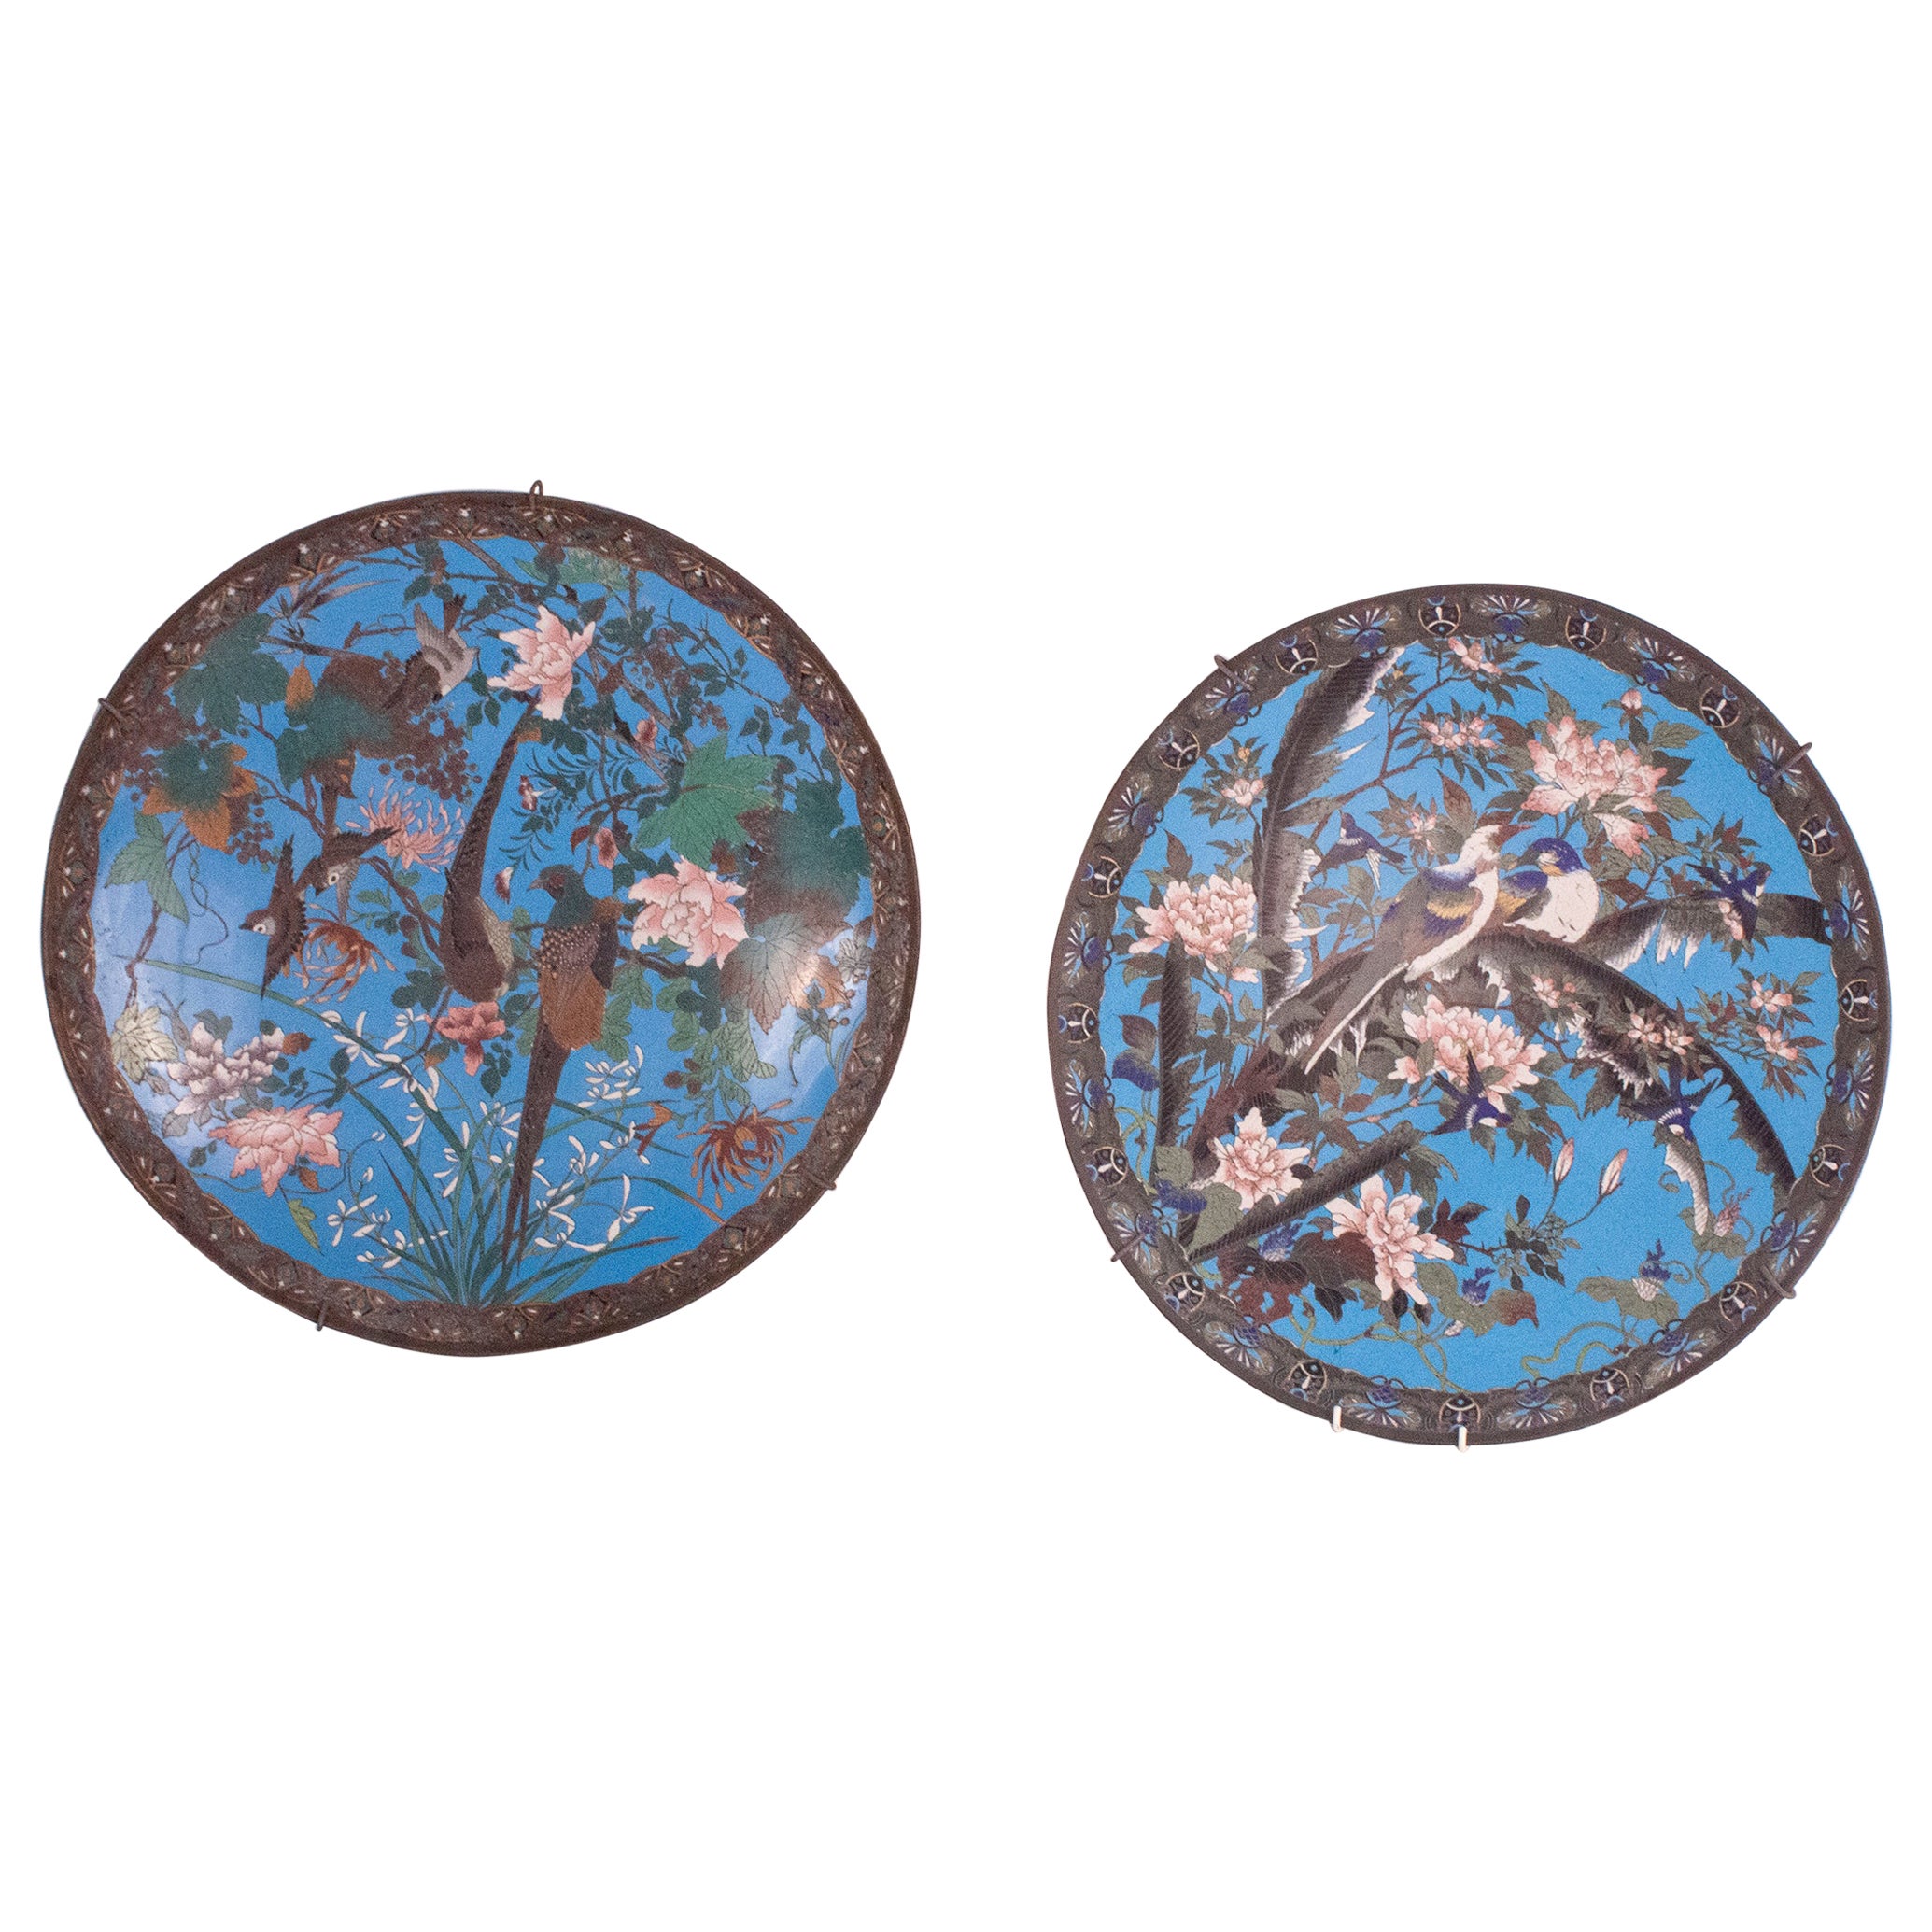 Set of Two Large Cloisonné Dishes, Japan 19th Century